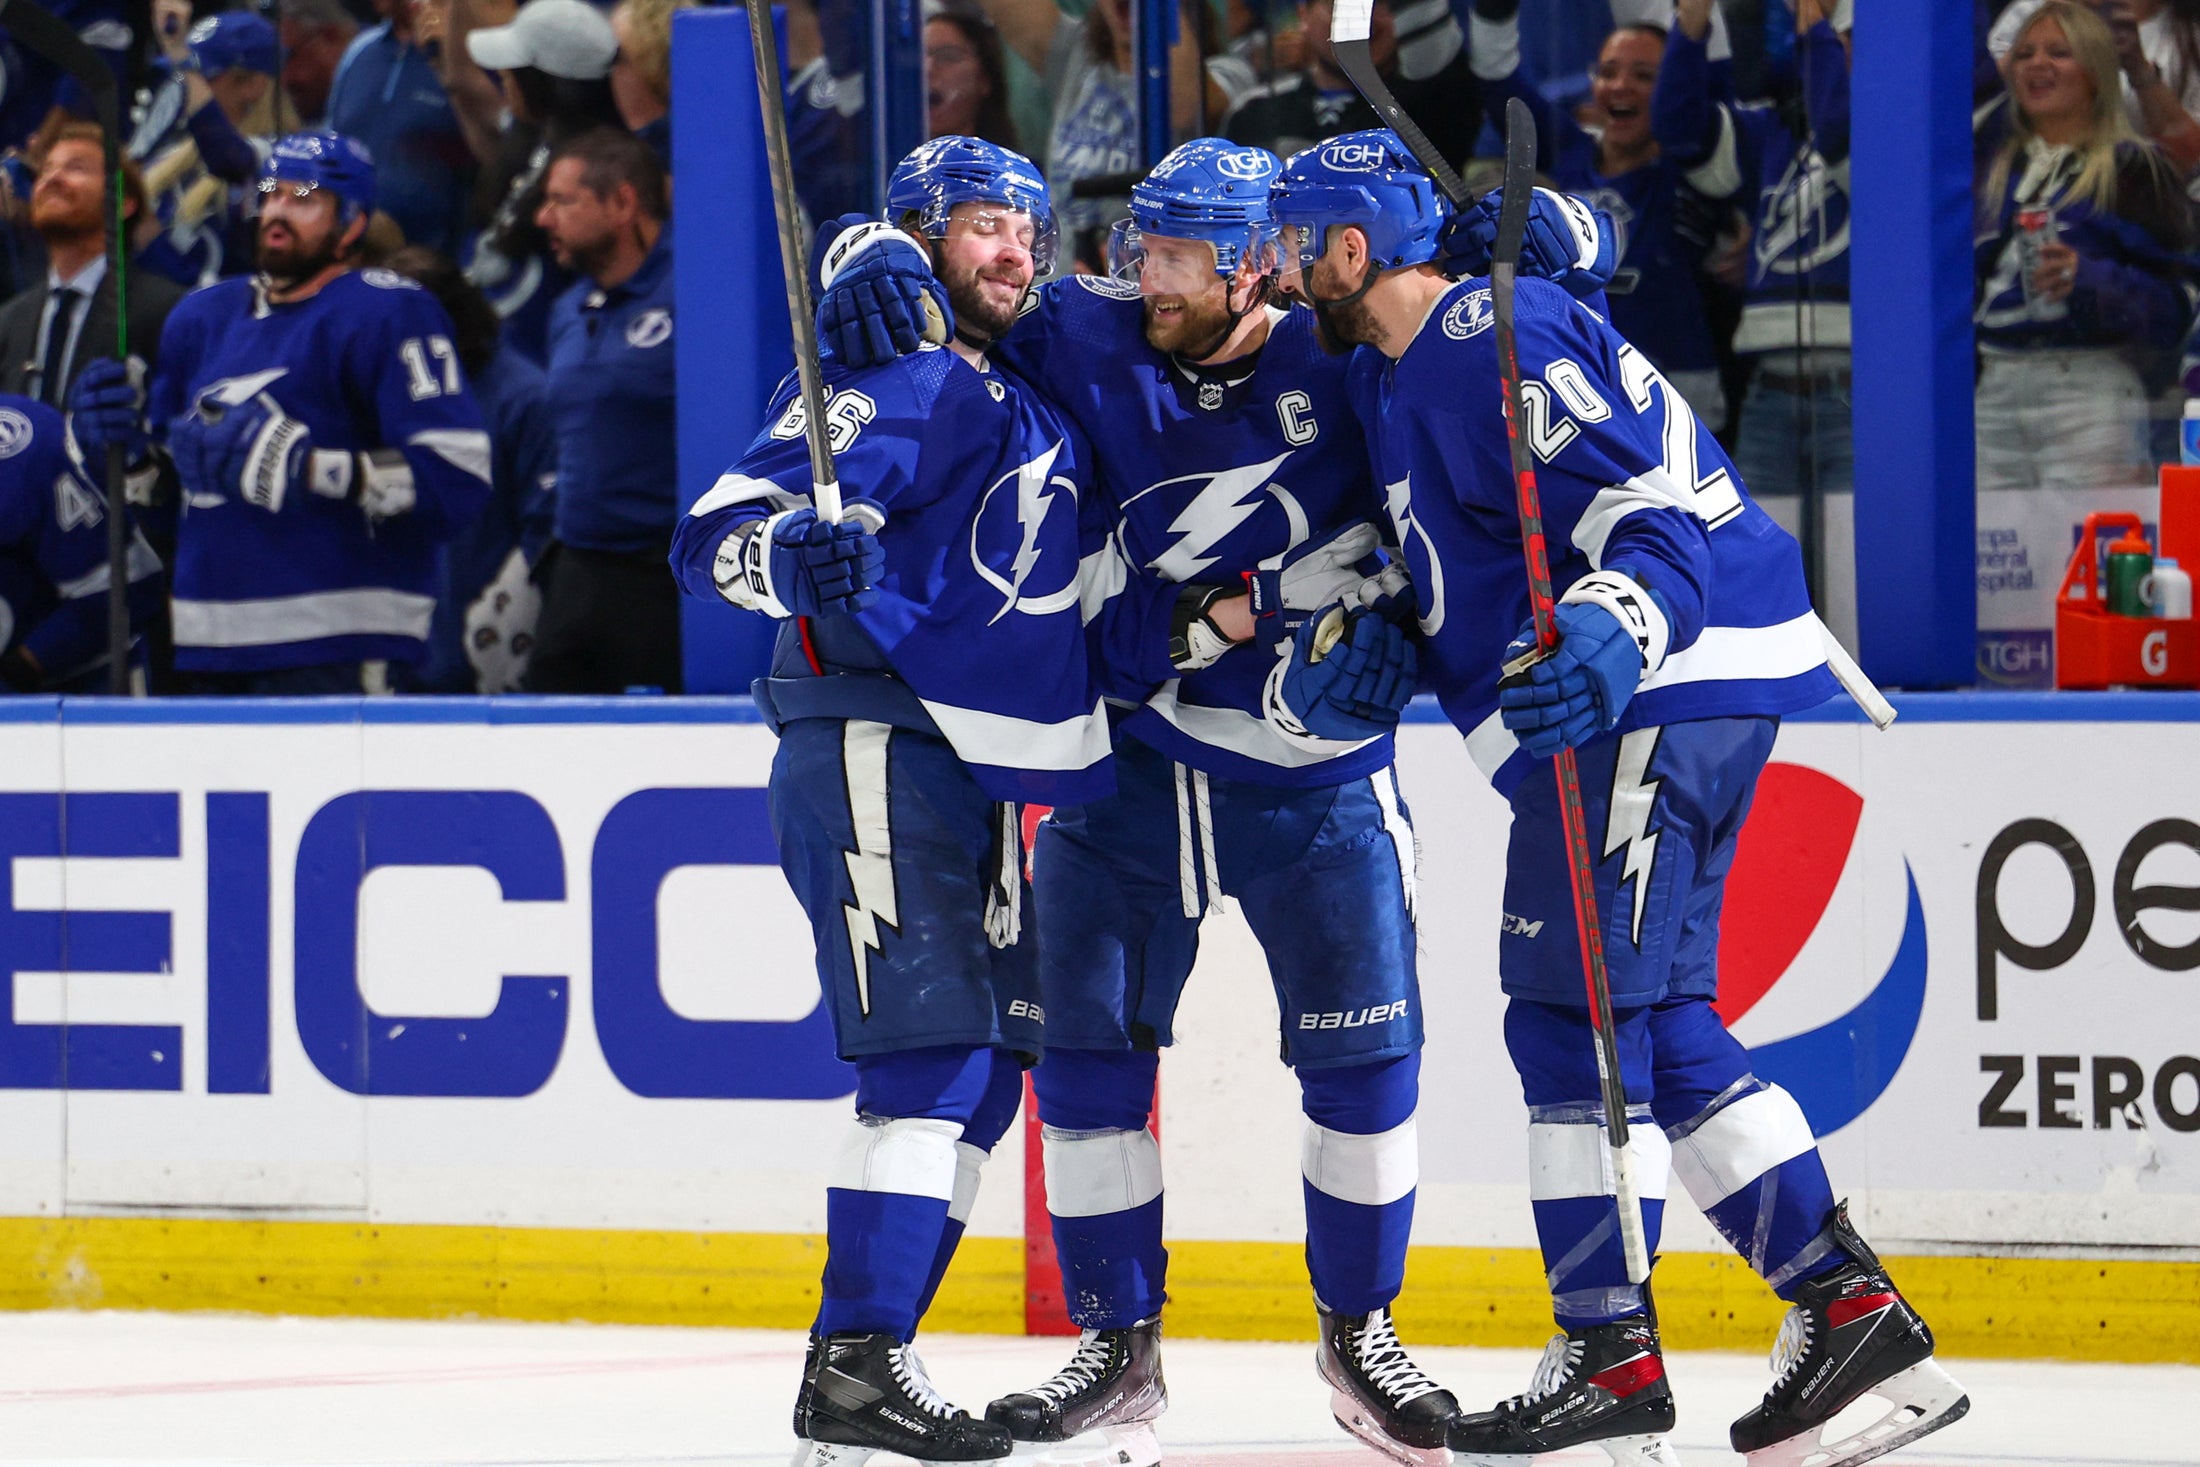 The Tampa Bay Lightning’s NHL playoffs run for a threepeat is astonishing.